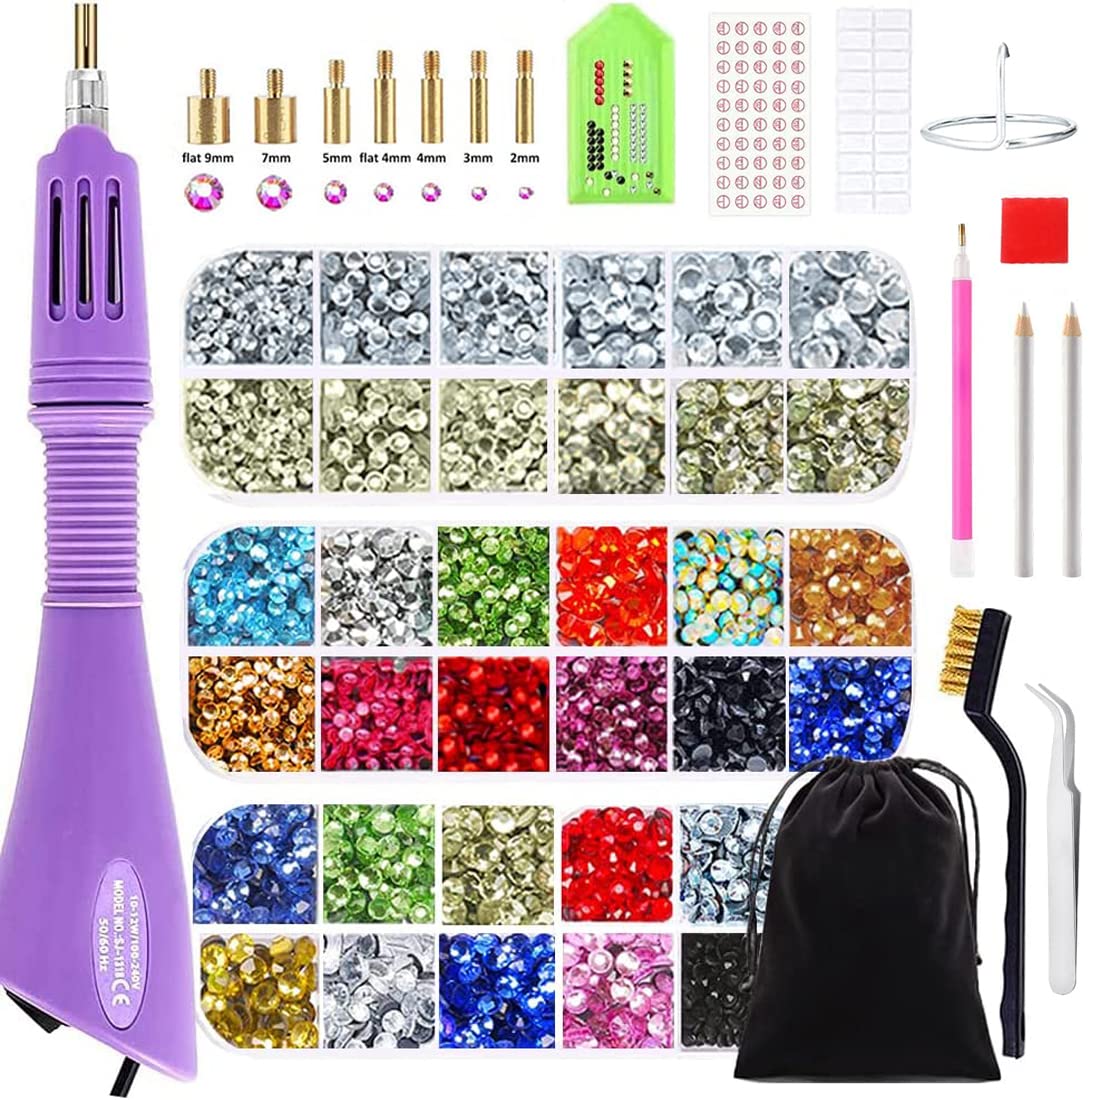 Hot Fix Applicator Tool Kits for Dress, Bag, Shoes, Bedazzler Kit with DIY Hot  Fix Rhinestones Include 7 Tips Set